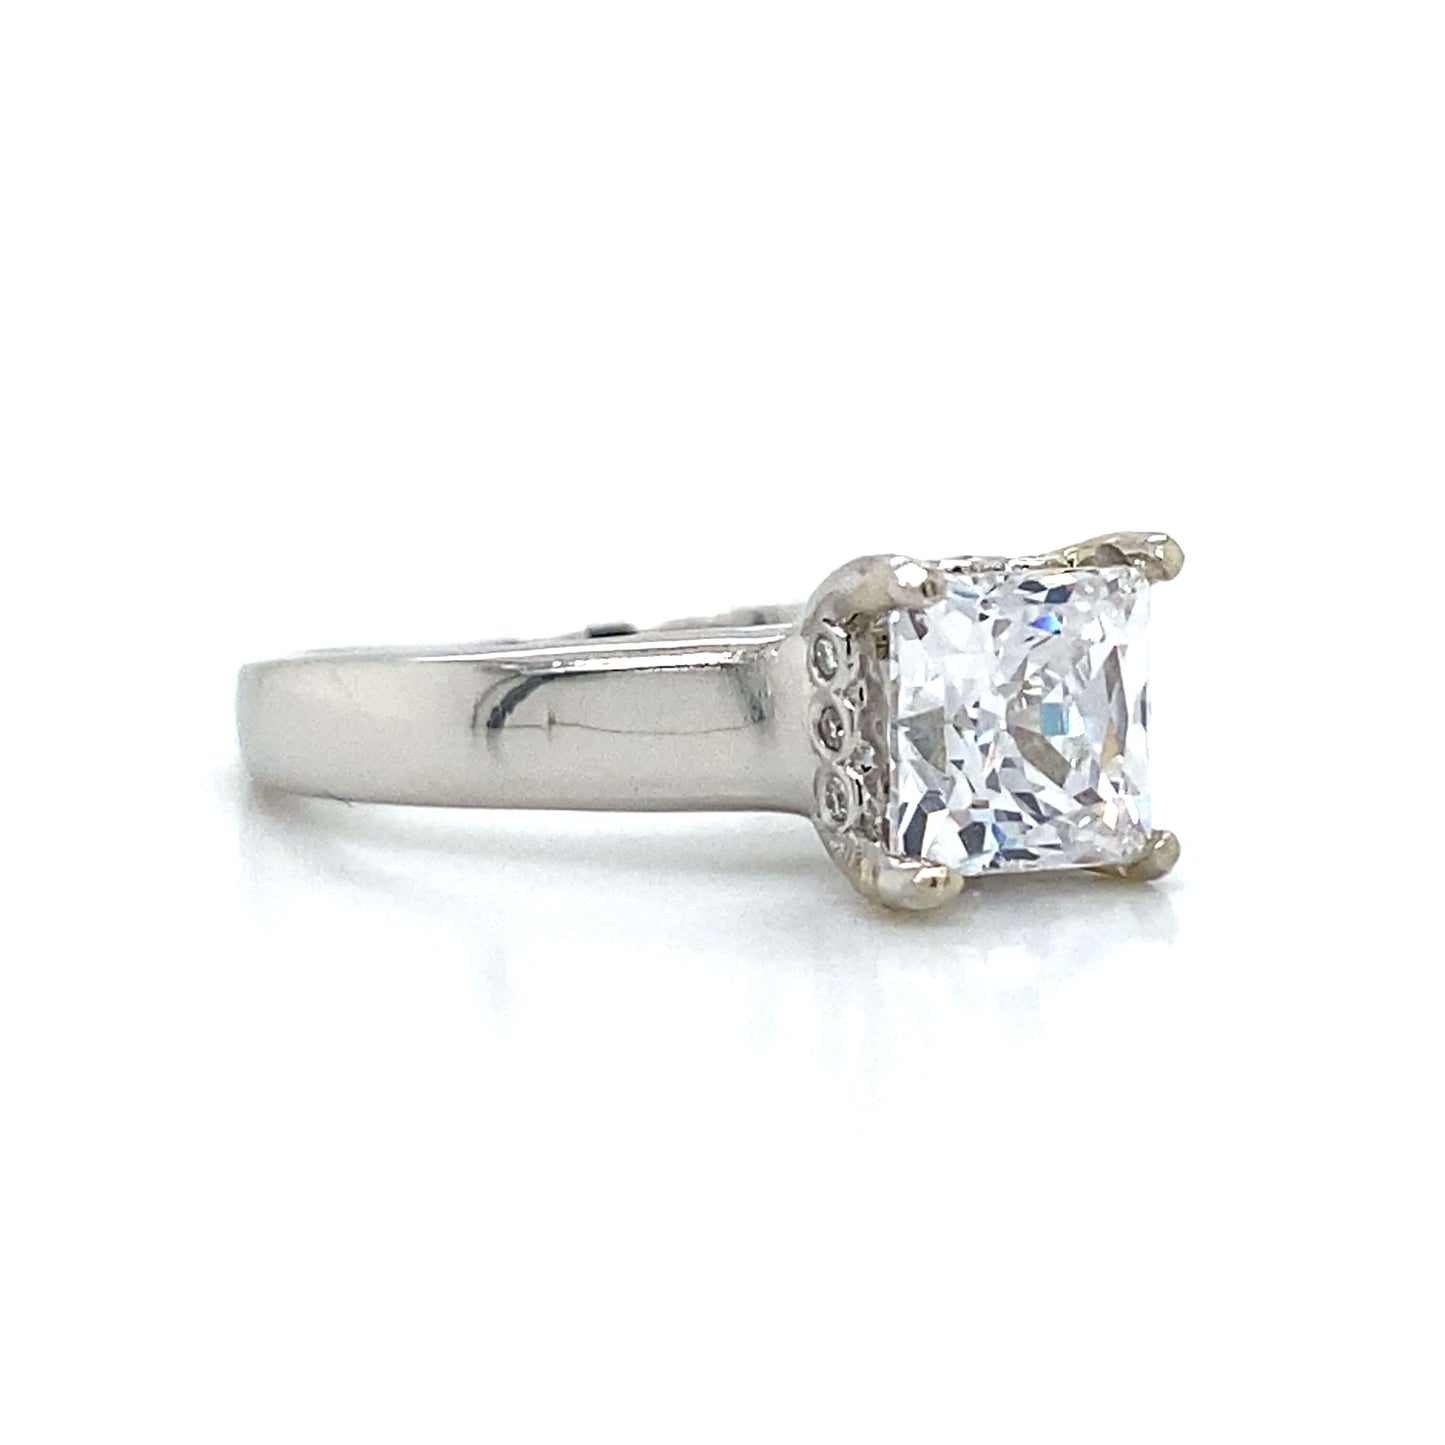 Solitaire Engagement Ring in 18K White Gold